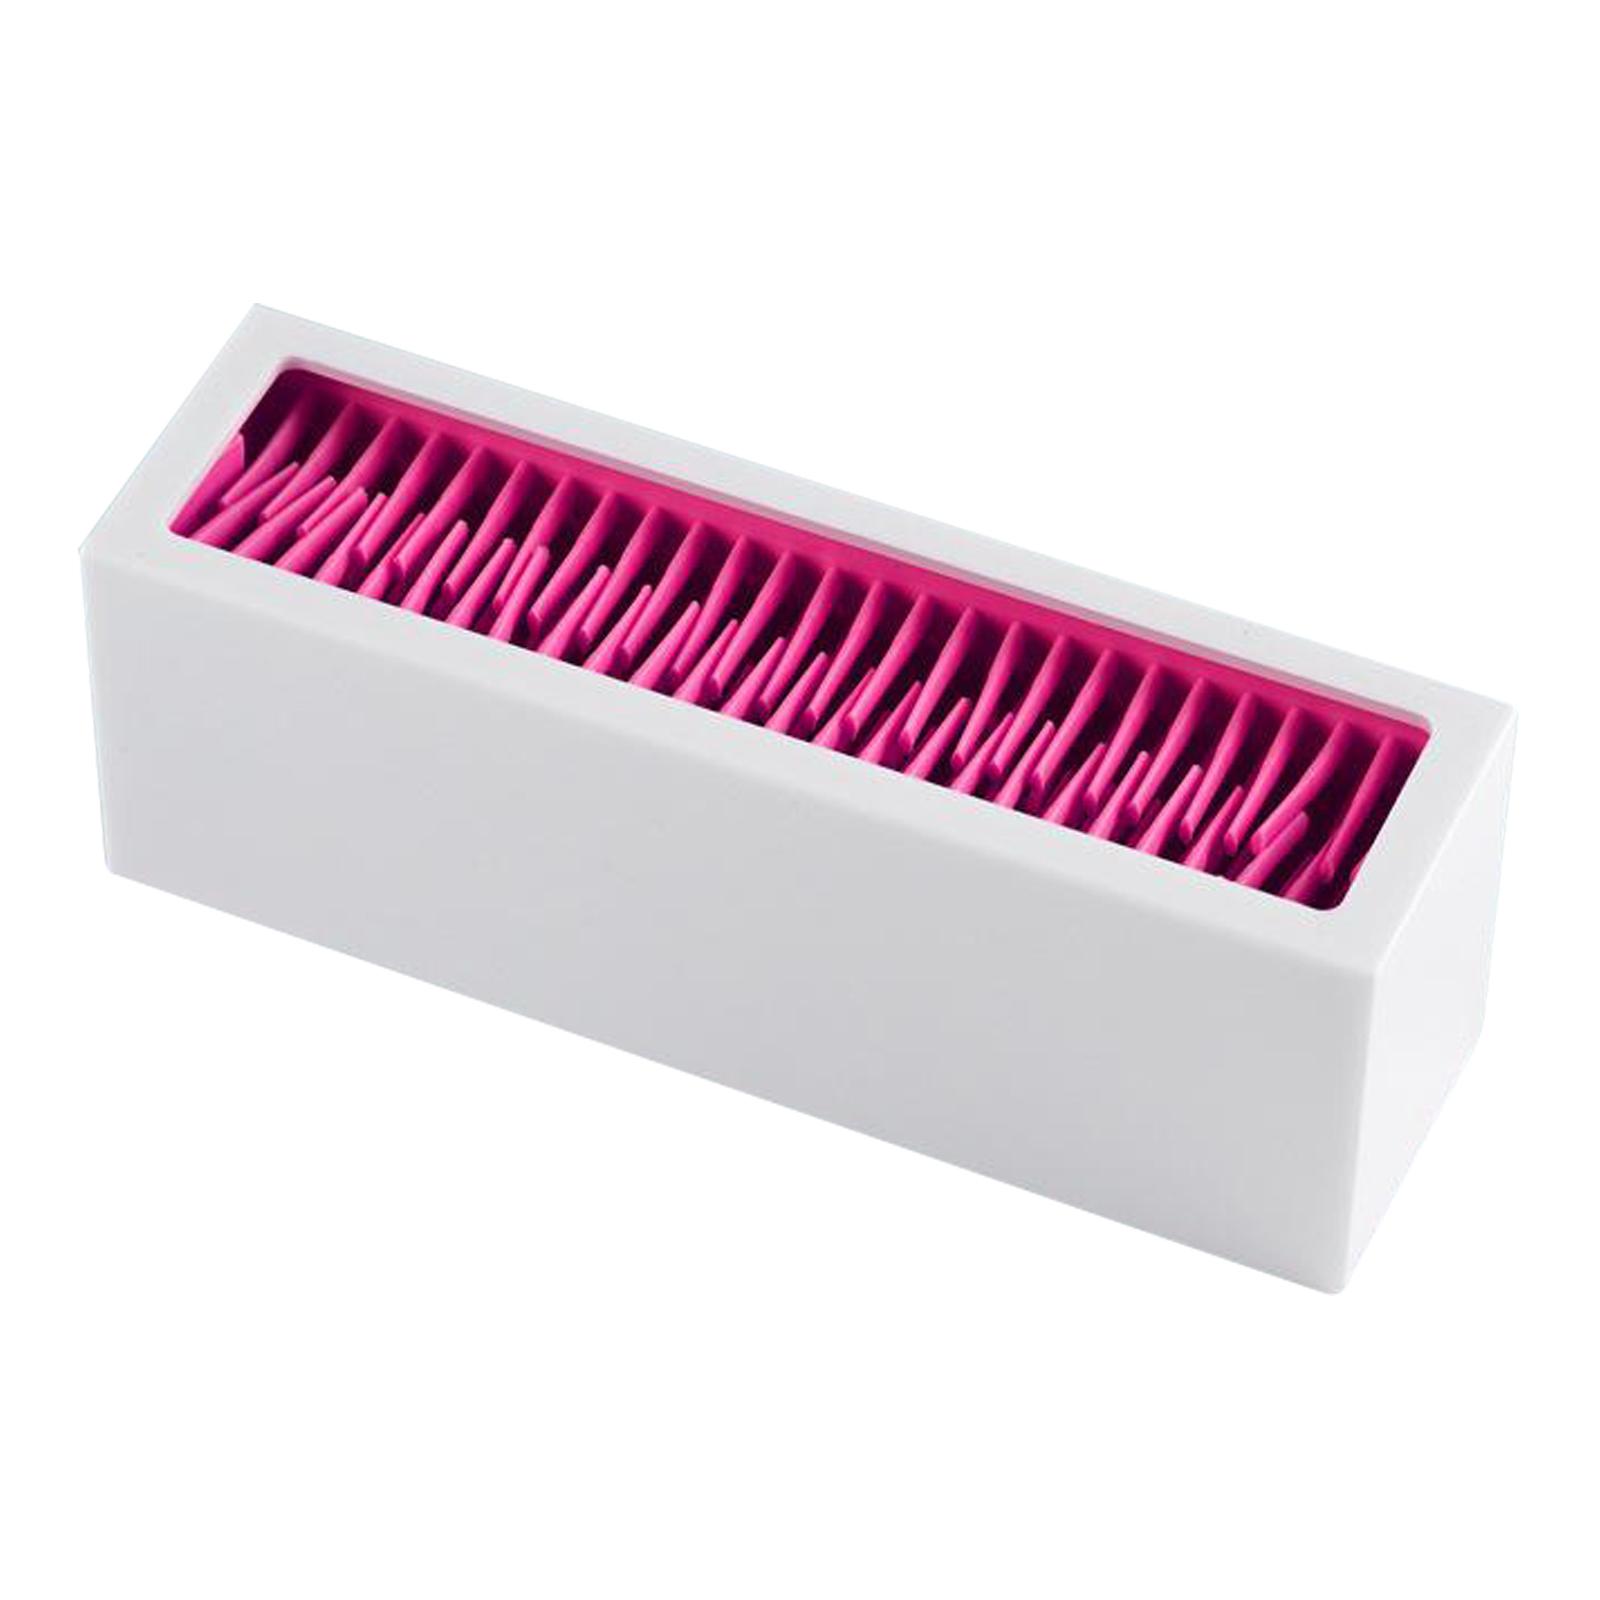 Makeup Brushes Holder Silicone Storage Rack for Cosmetic Tools White Red